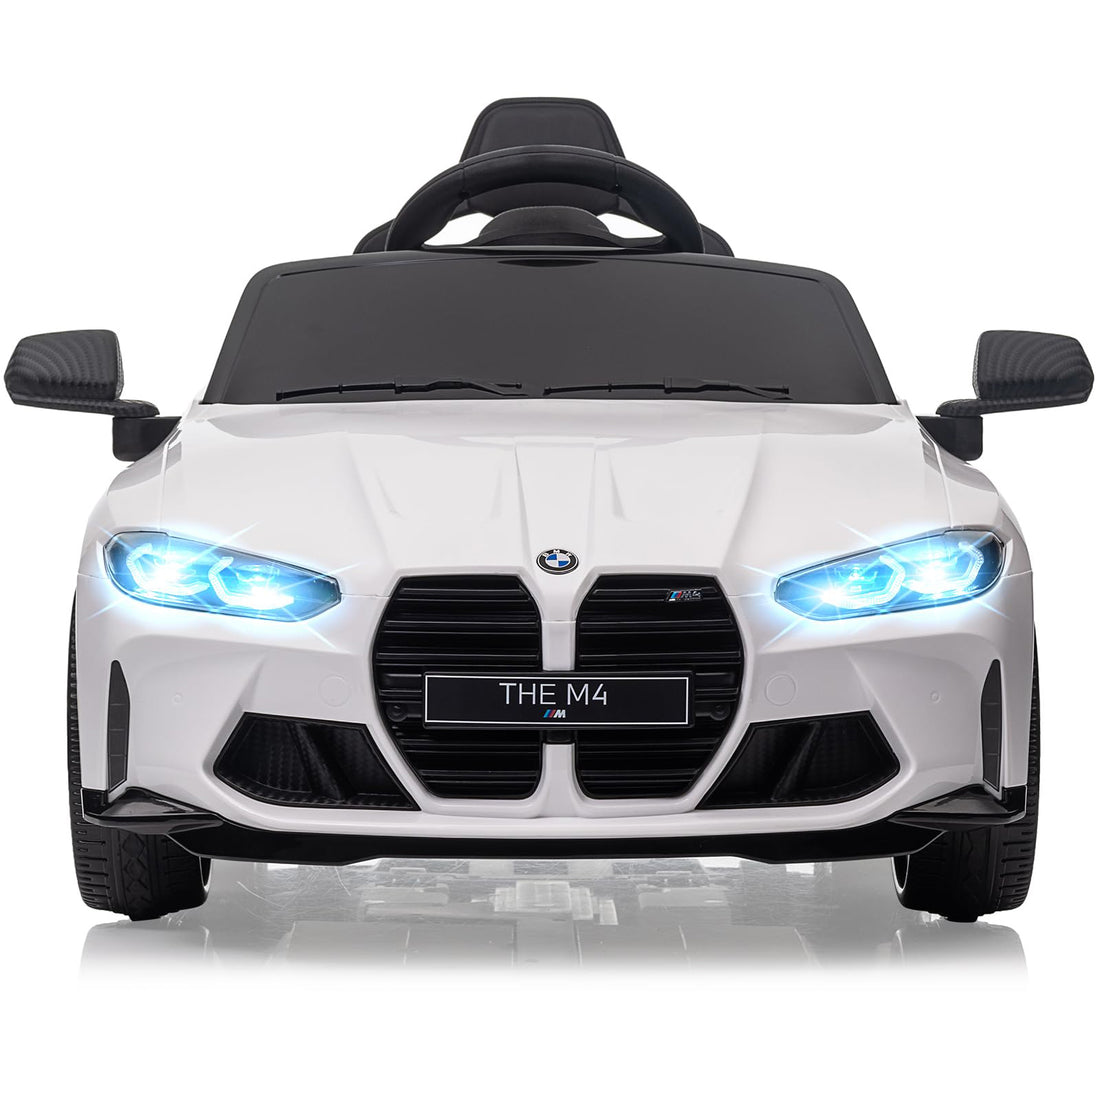 12V Electric Ride On Car w/RC,Licensed by BMW M4 Toddler Electric Vehicle for 37-83 Months,Power Wheels for Boys Girls, with Suspension System,3 Speeds, Bluetooth, MP3, Double Door, LED Light